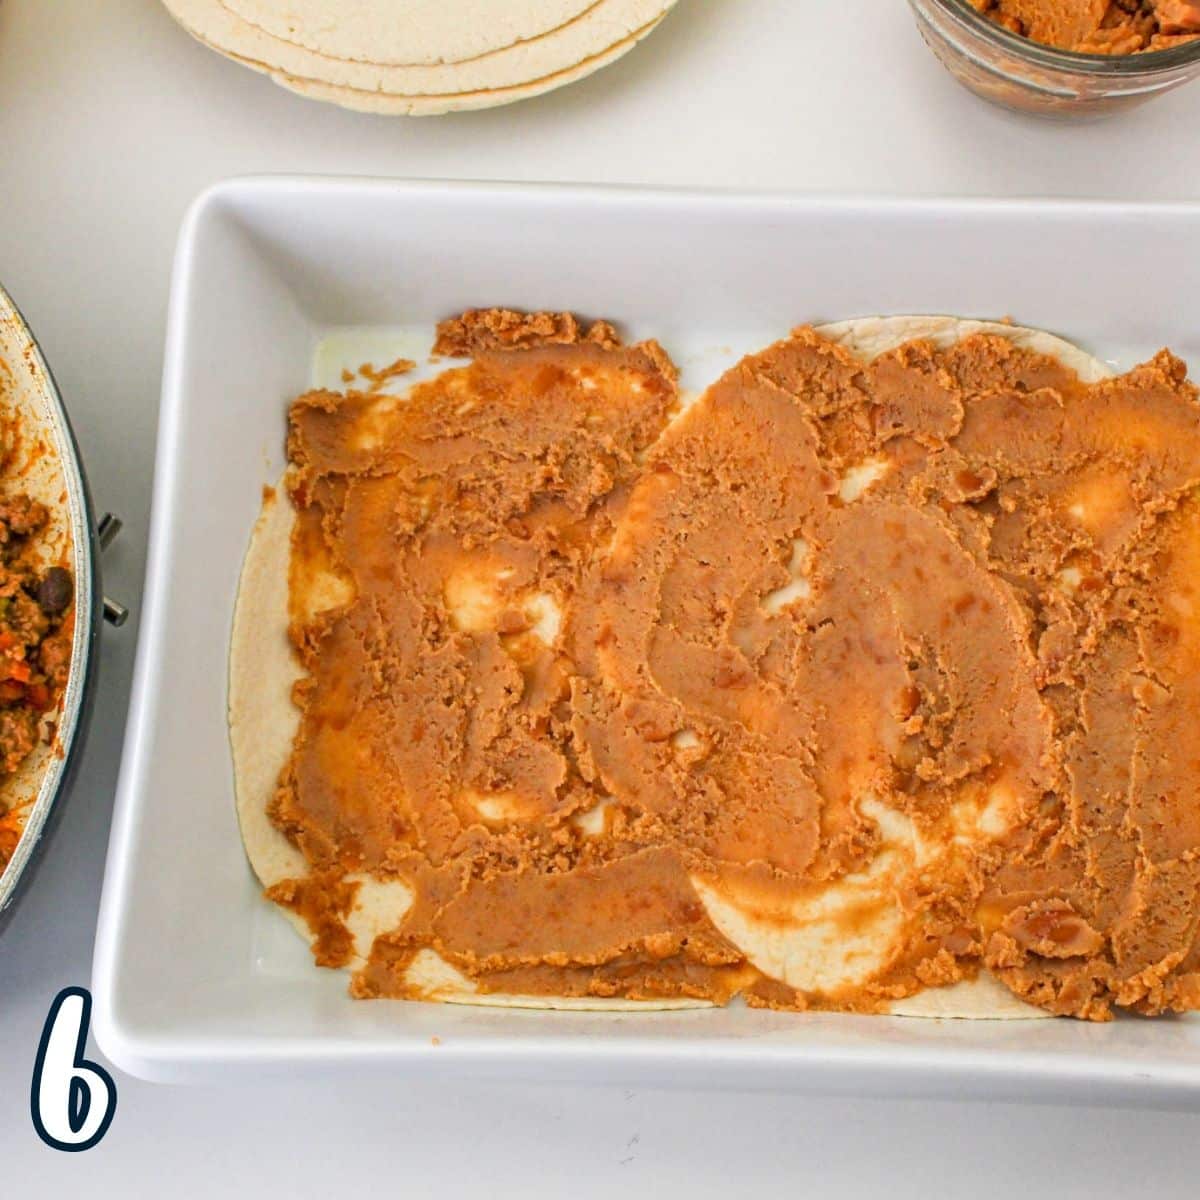 Refried beans spread over a layer of tortillas in a baking dish. 